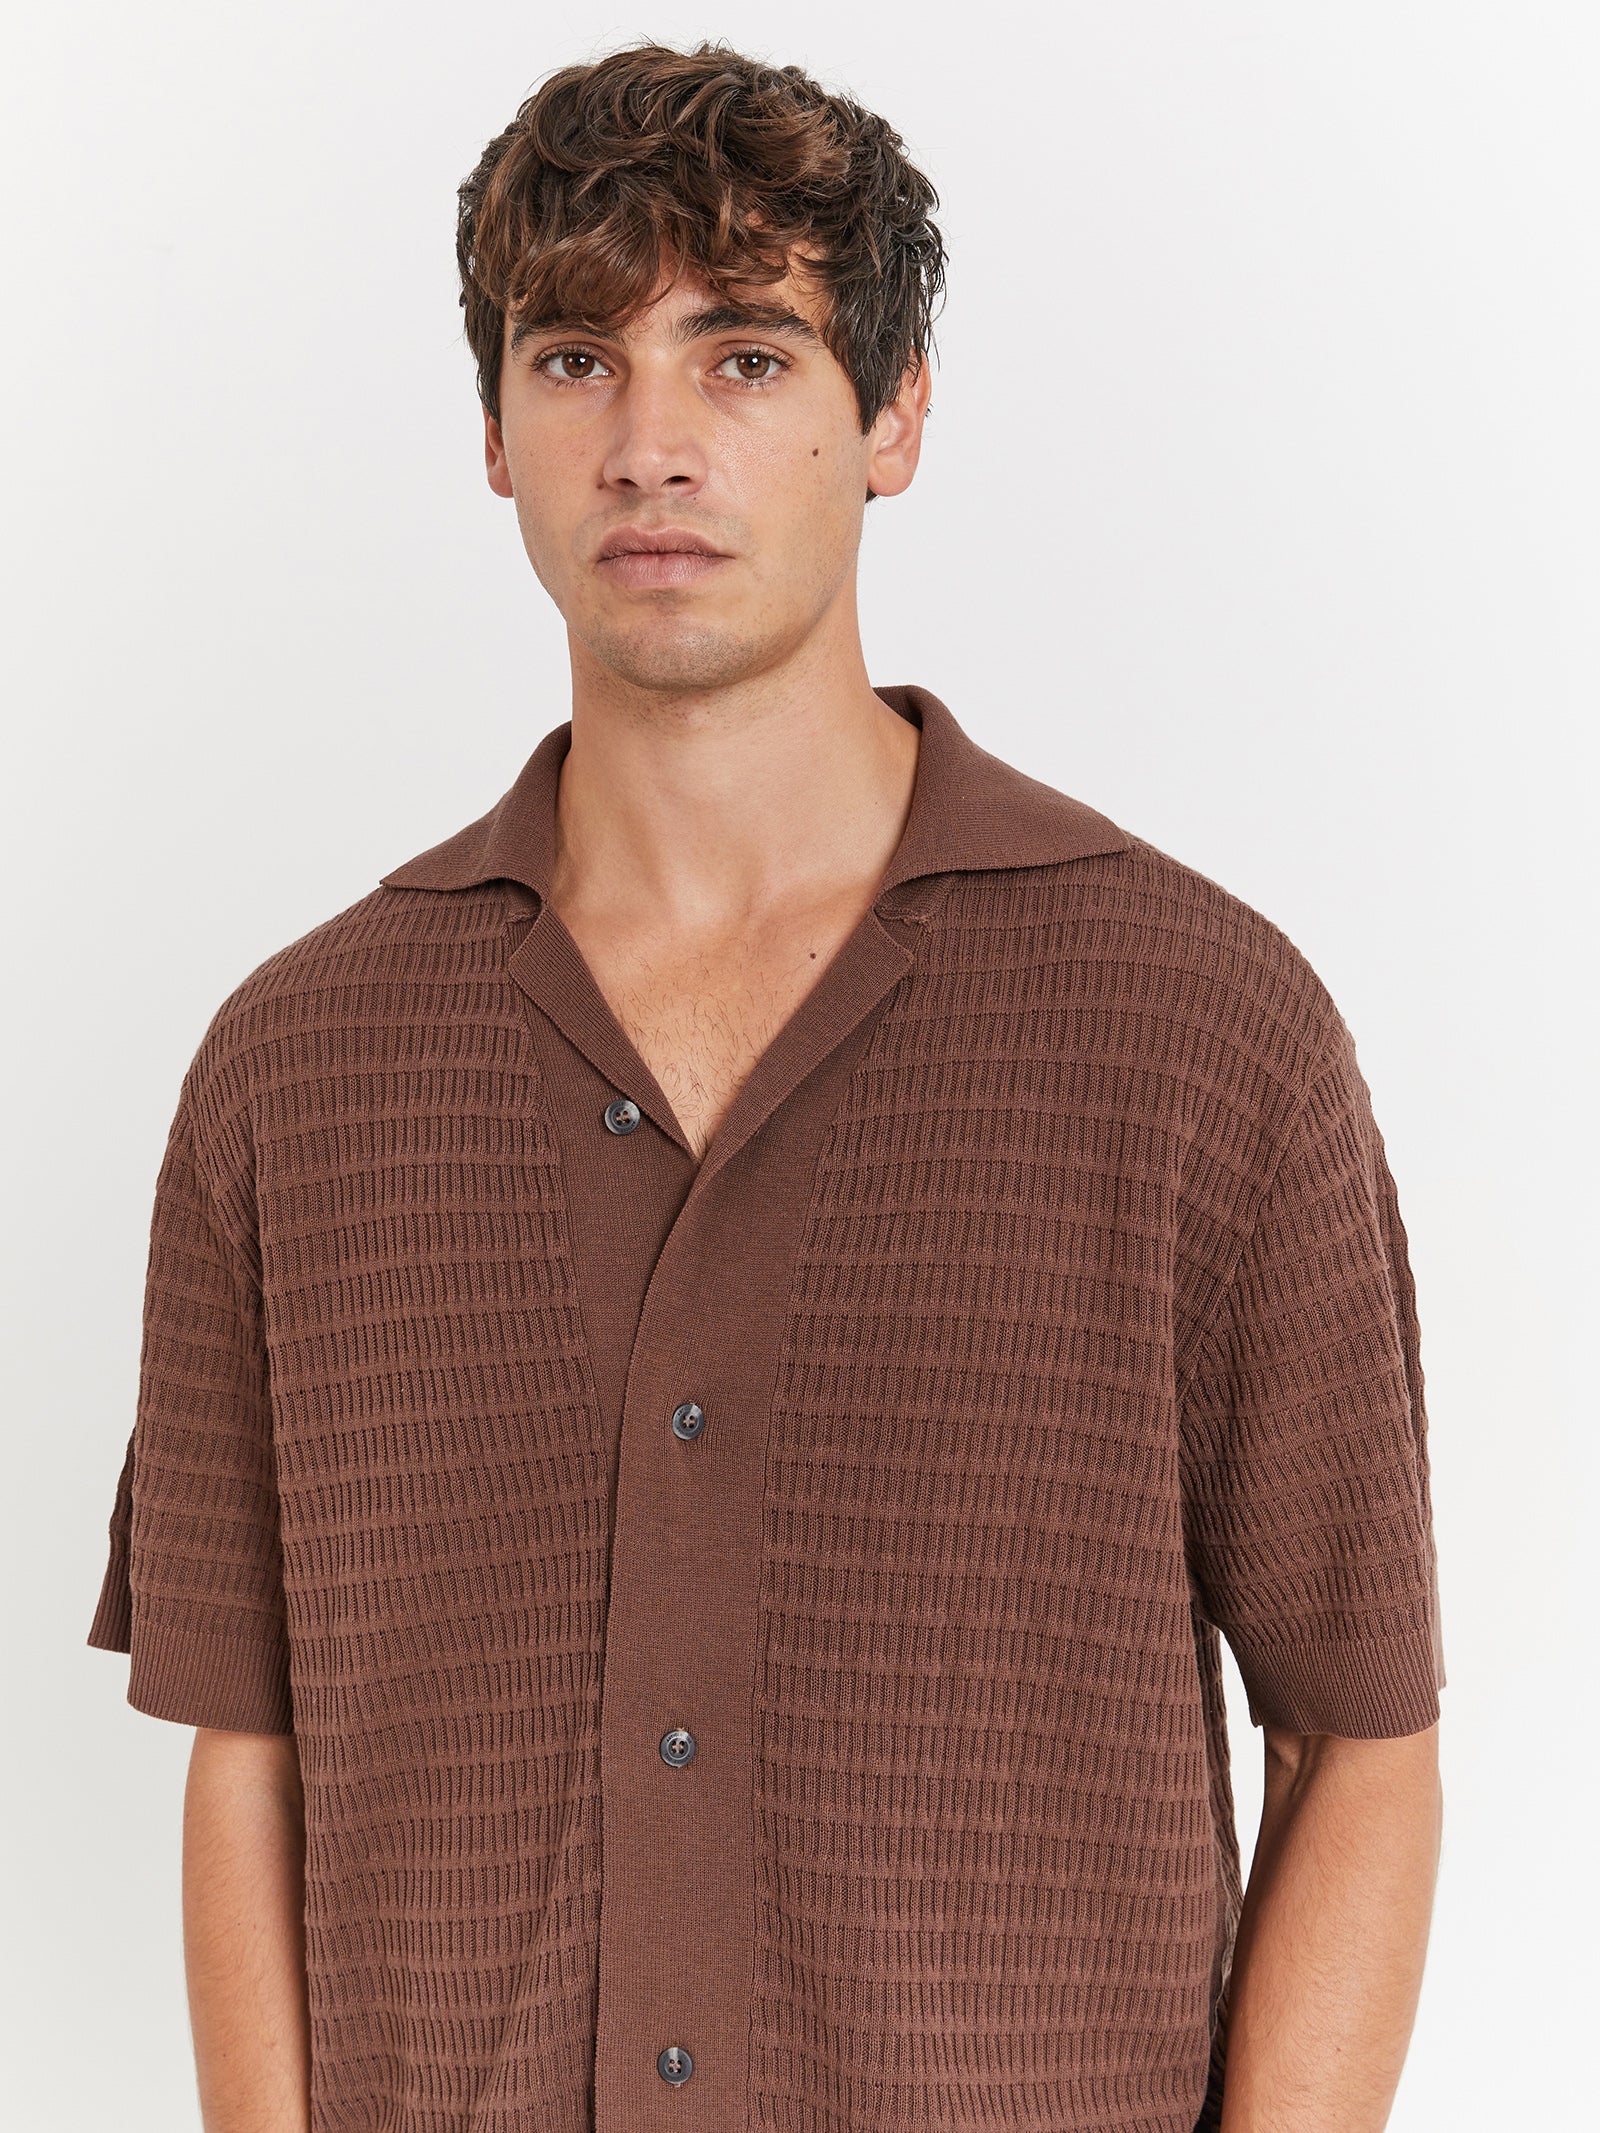 Zanito Knit Shirt in Taupe - Glue Store